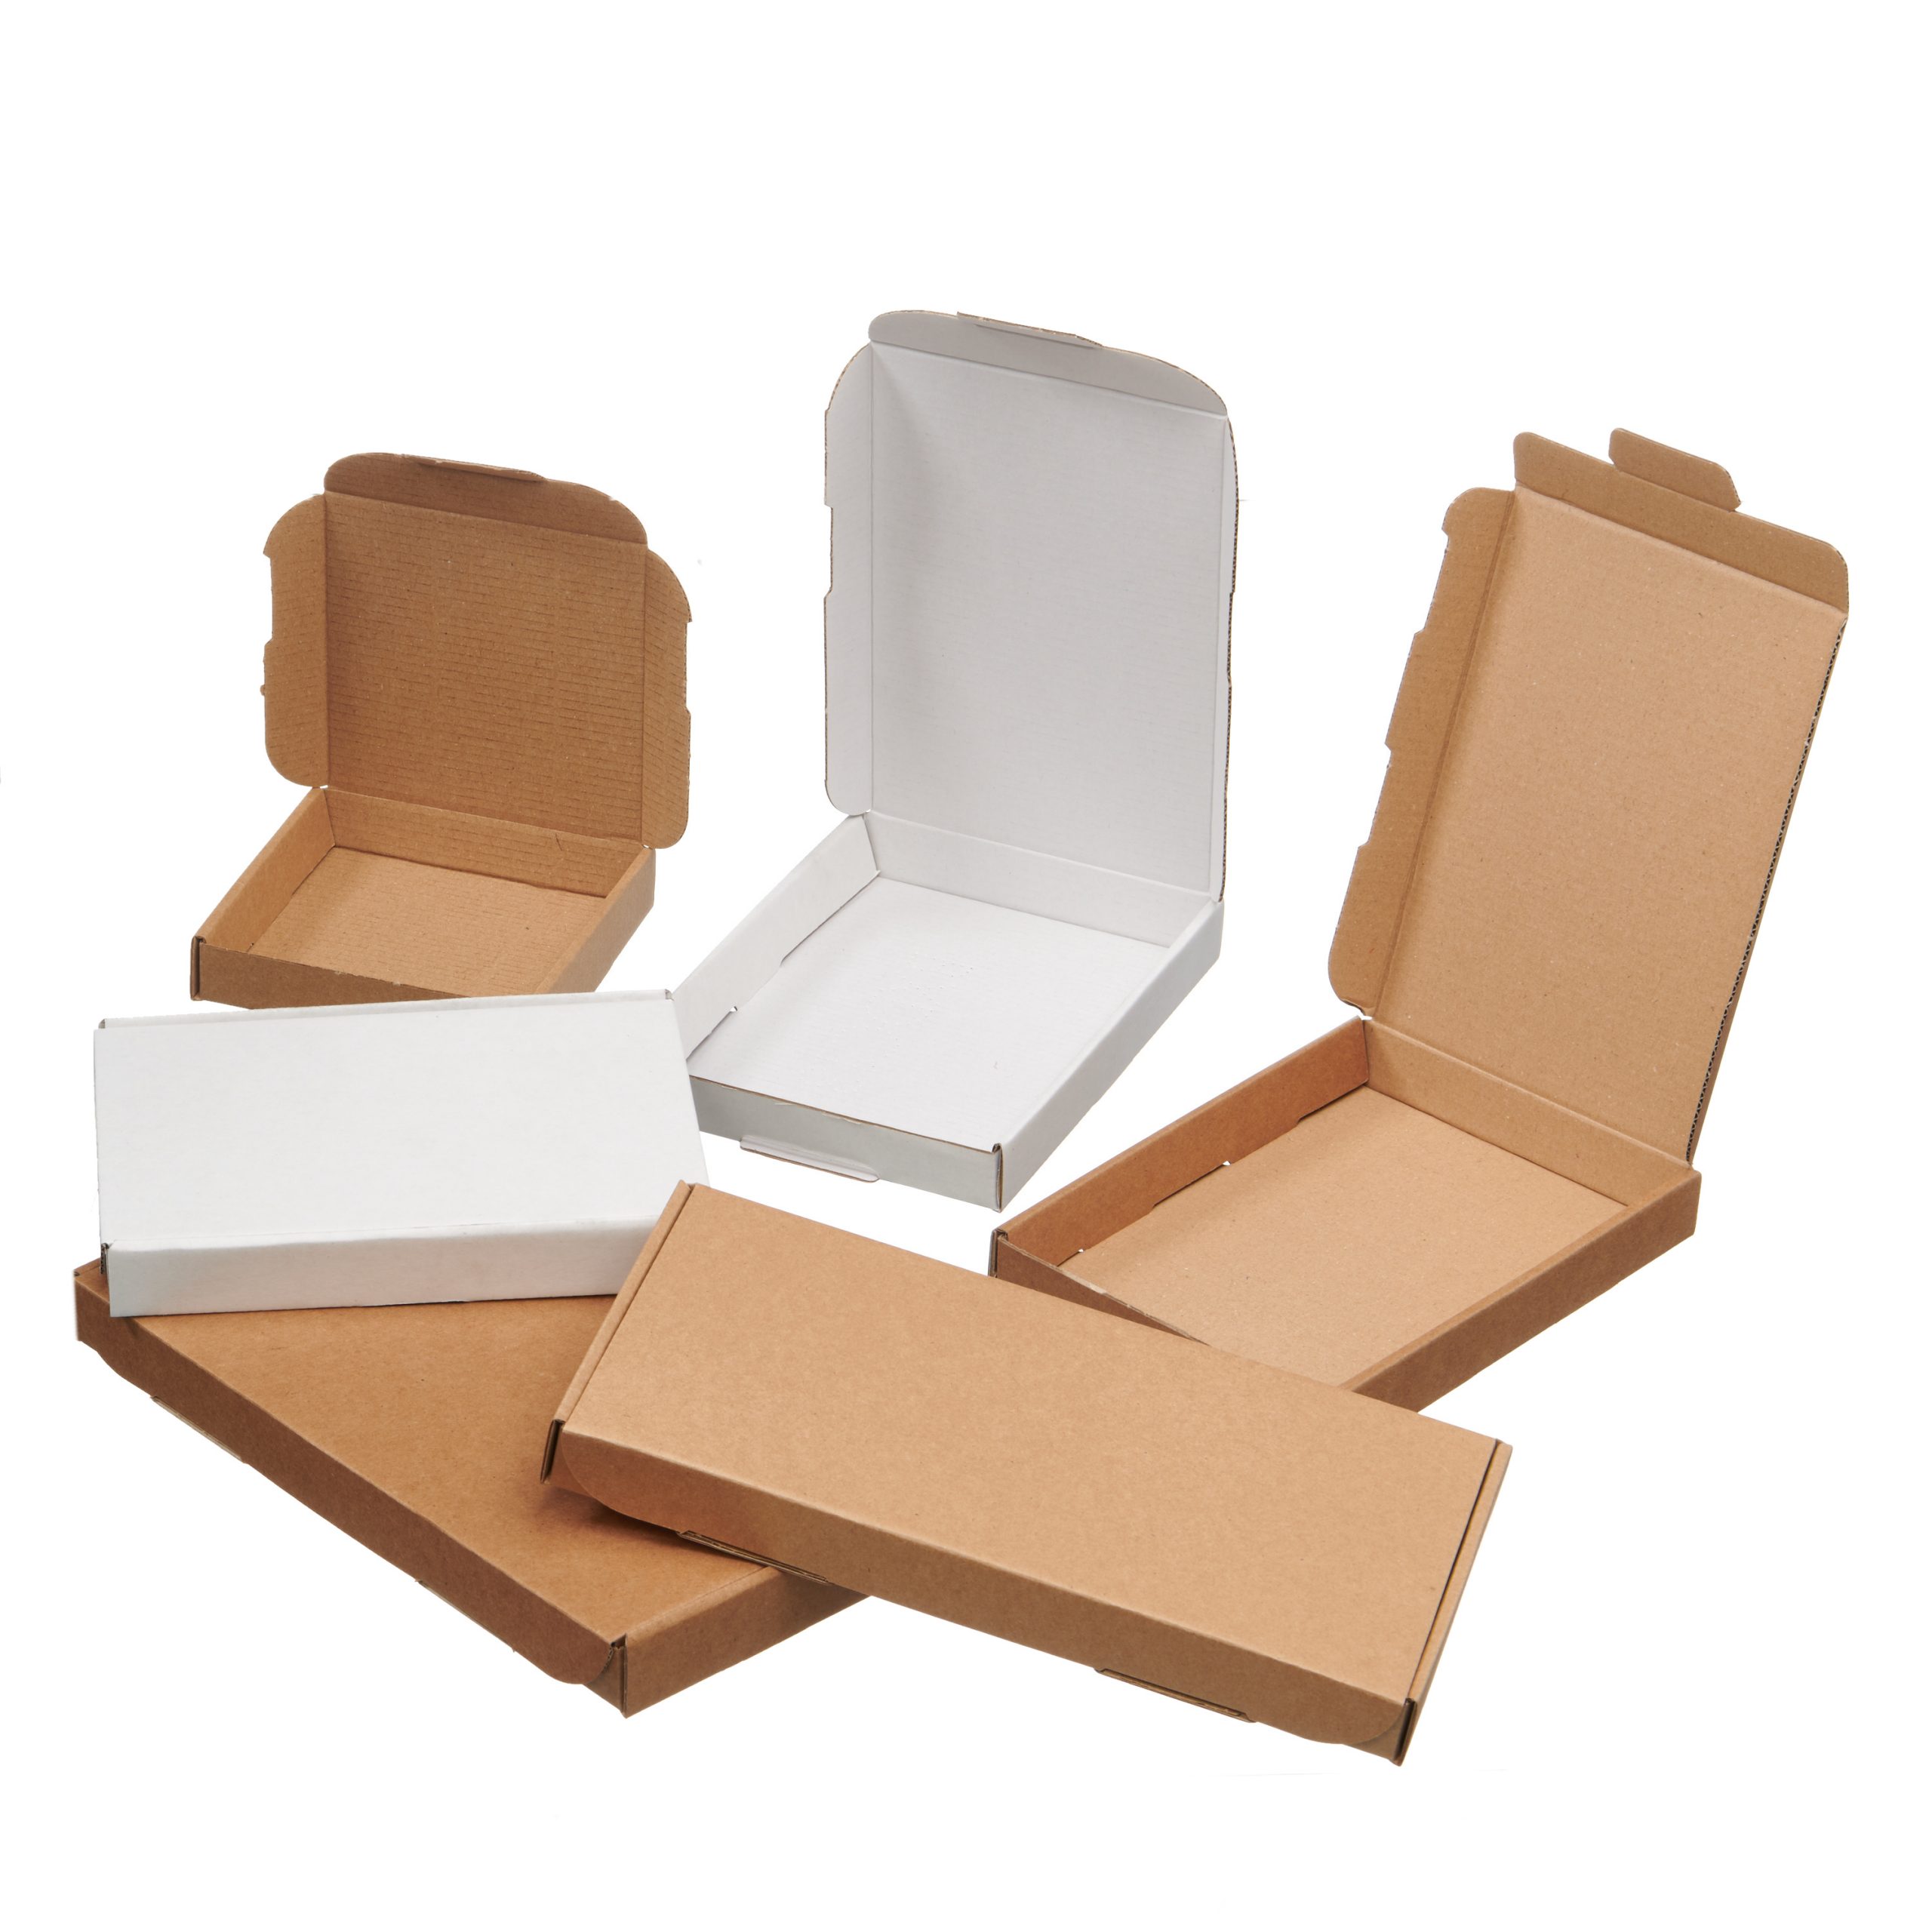 White Cardboard Postal Boxes Royal Mail Small Parcel Mailing & Shipping Boxes 